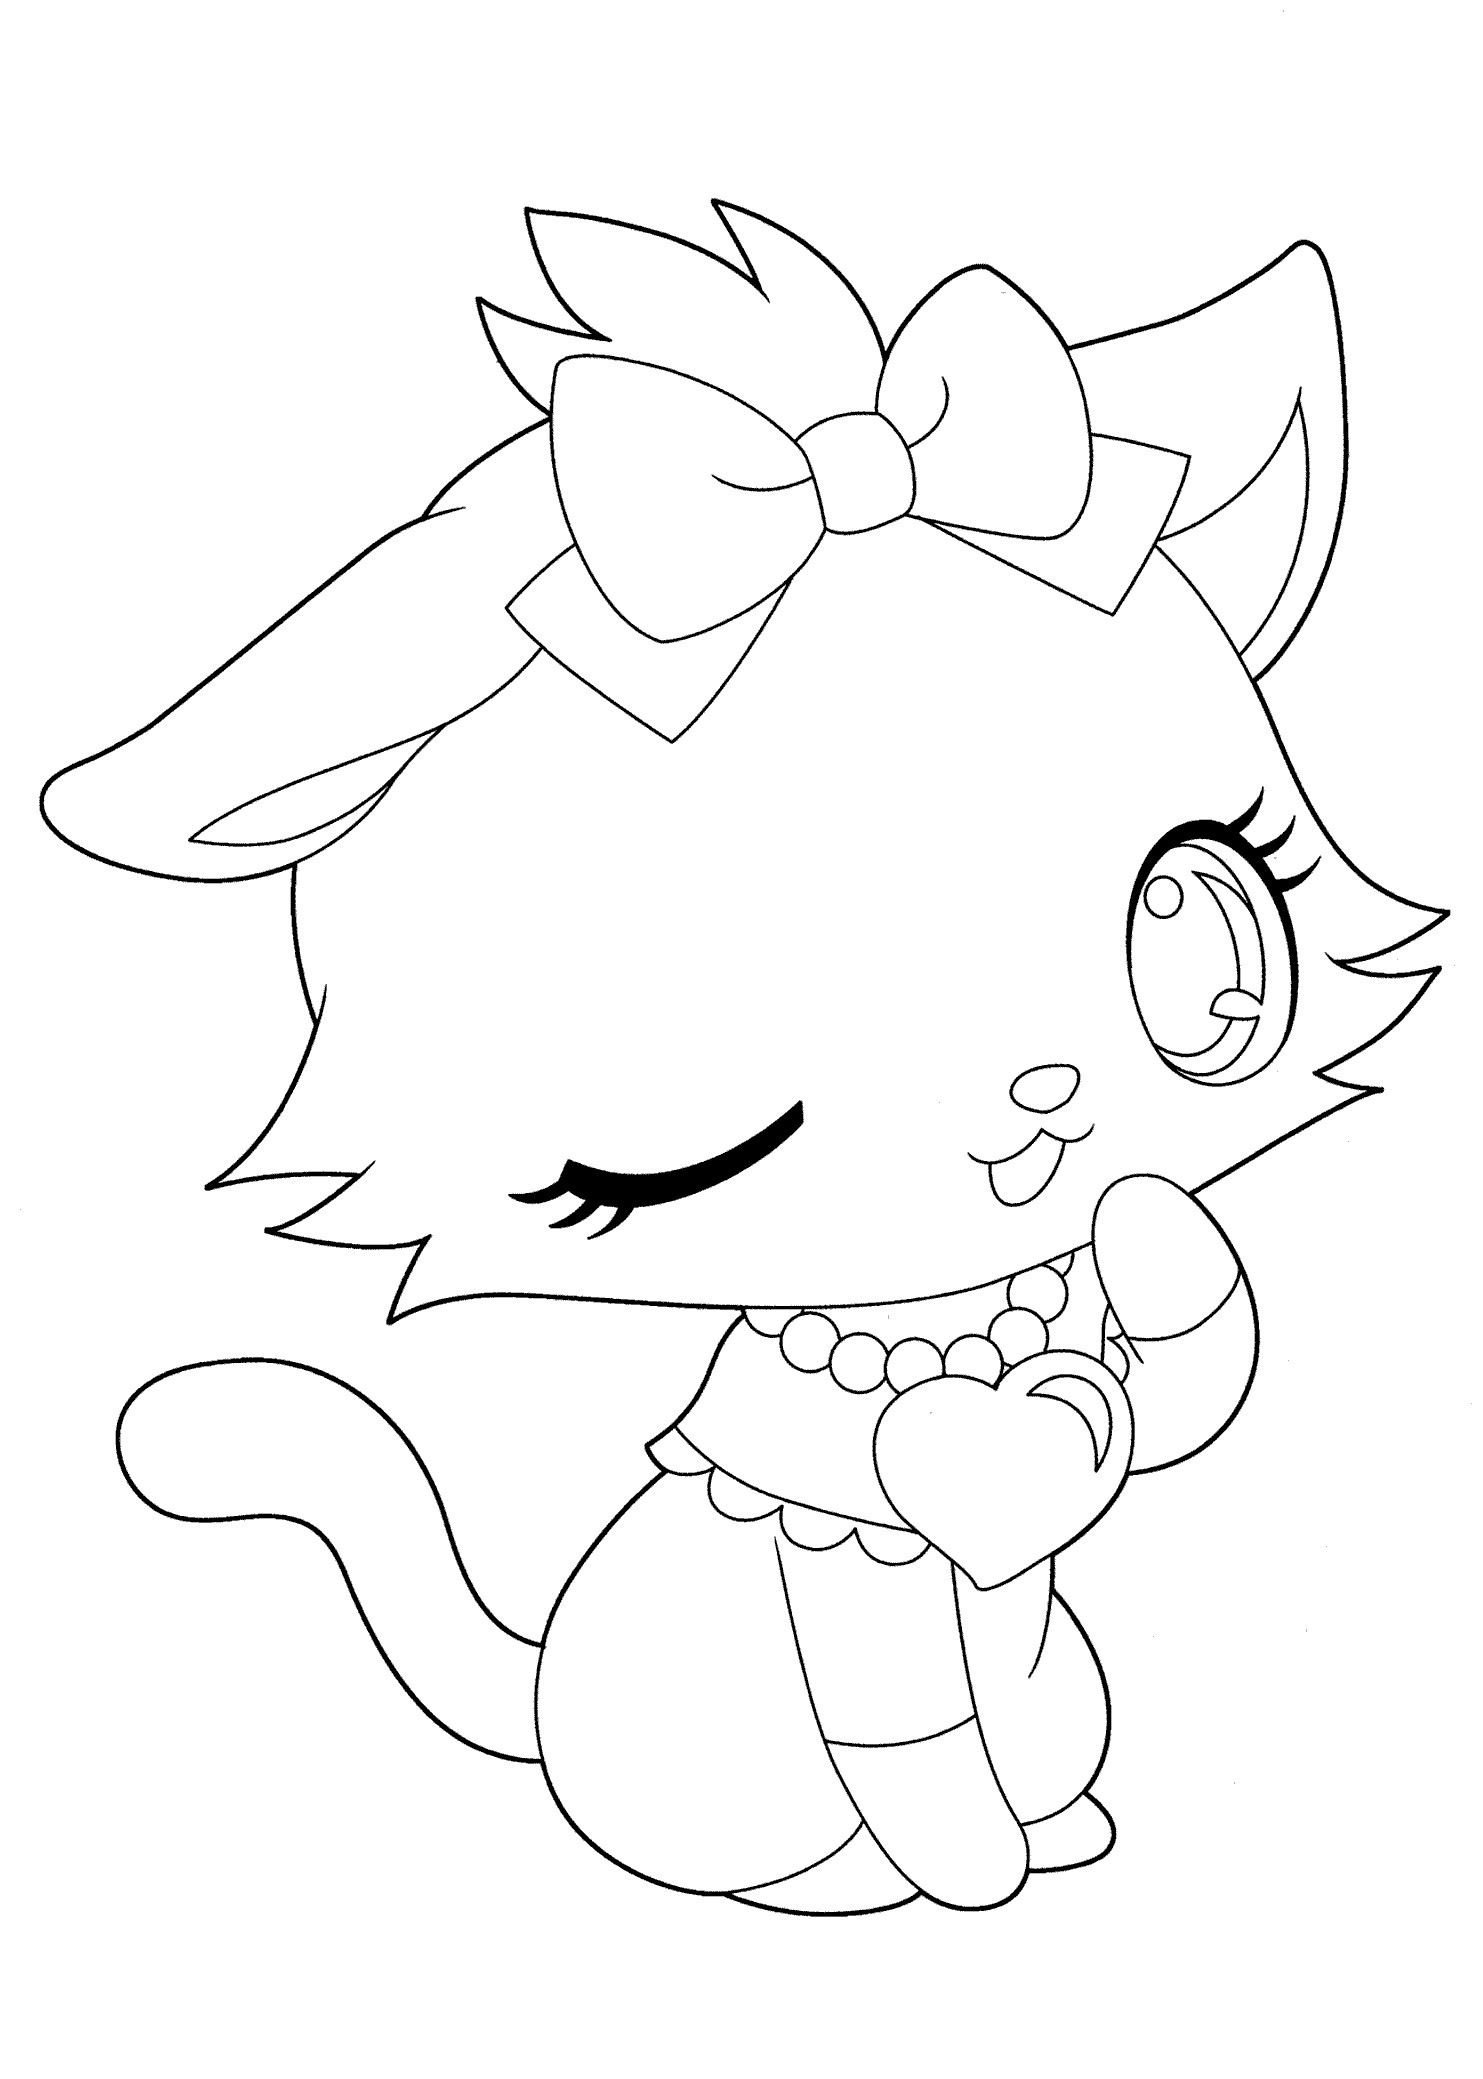 Kawaii Coloring Pages Free New Extraordinary In Unicorn Coloring Page with Hd Pages Free New Jewelpet